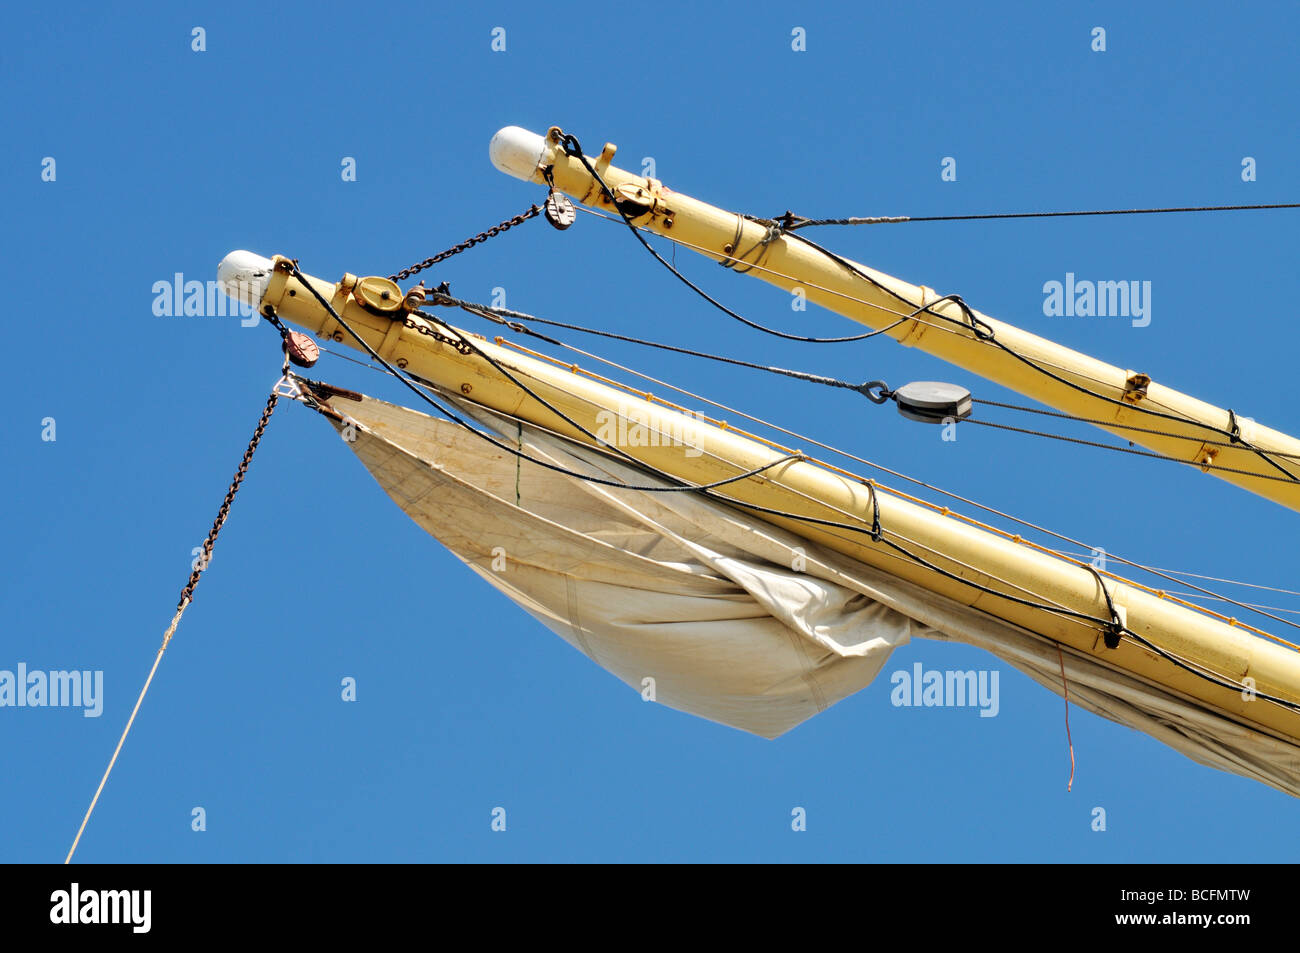 Sailboat yardarm with furled sail rigging and block and tackle Stock Photo